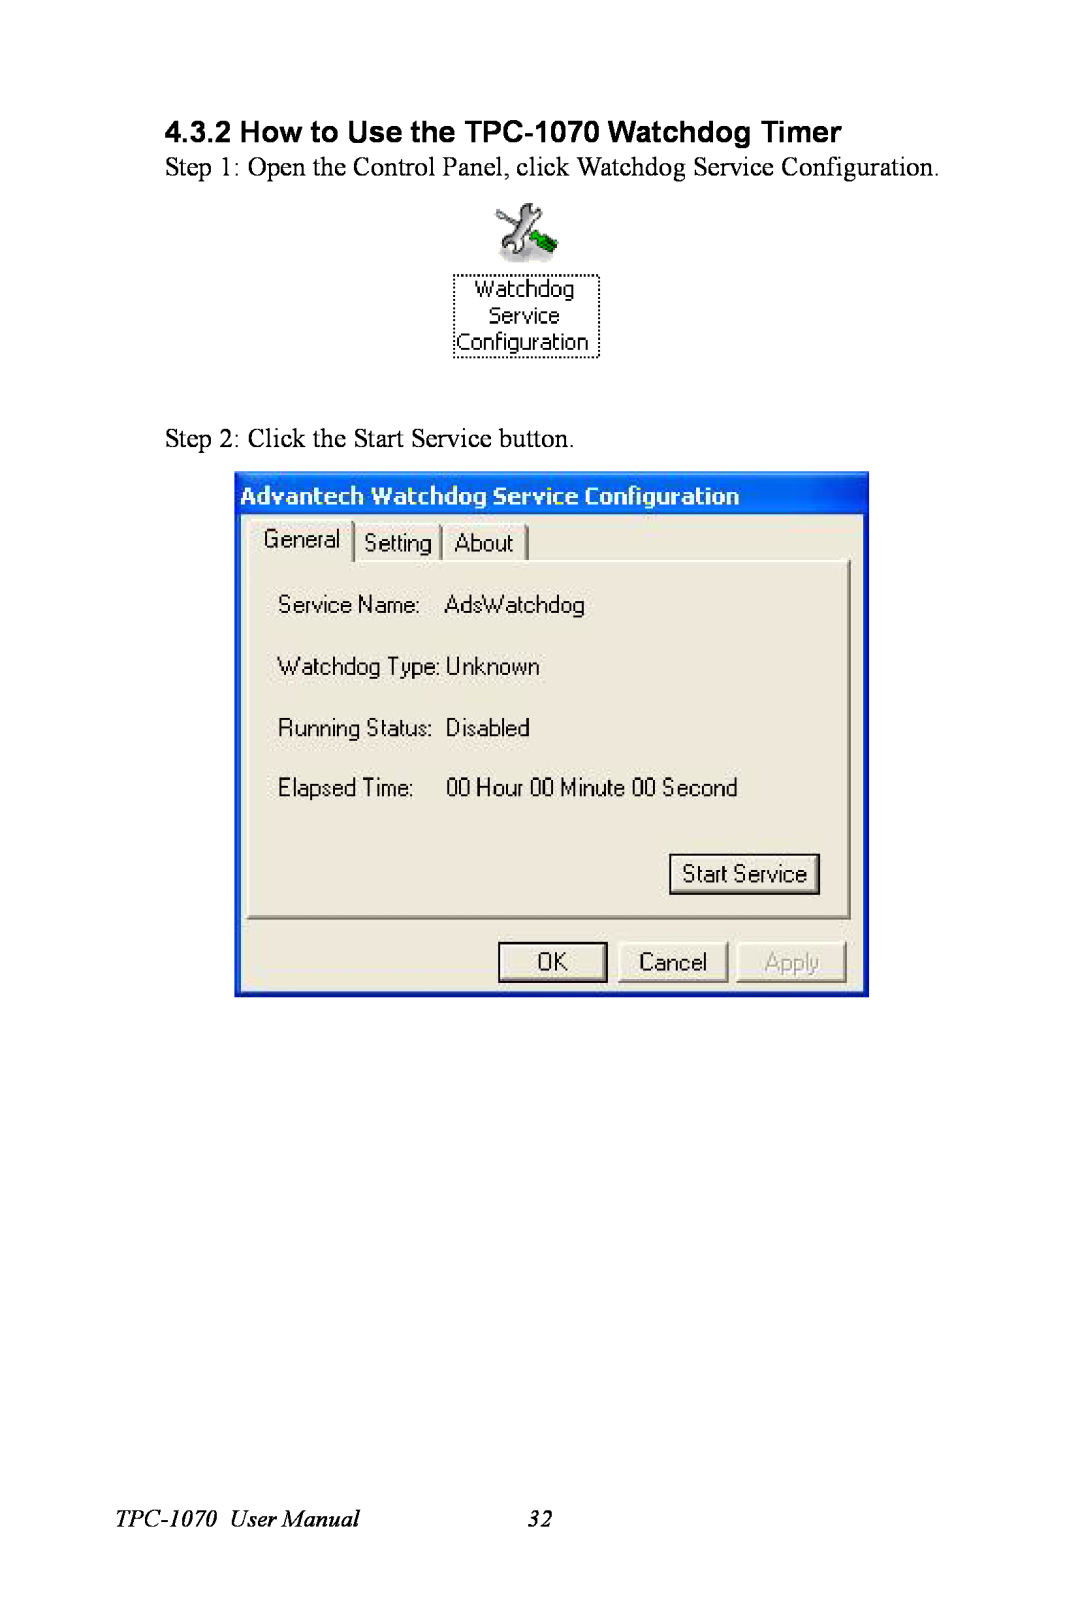 Intel user manual How to Use the TPC-1070 Watchdog Timer, Open the Control Panel, click Watchdog Service Configuration 